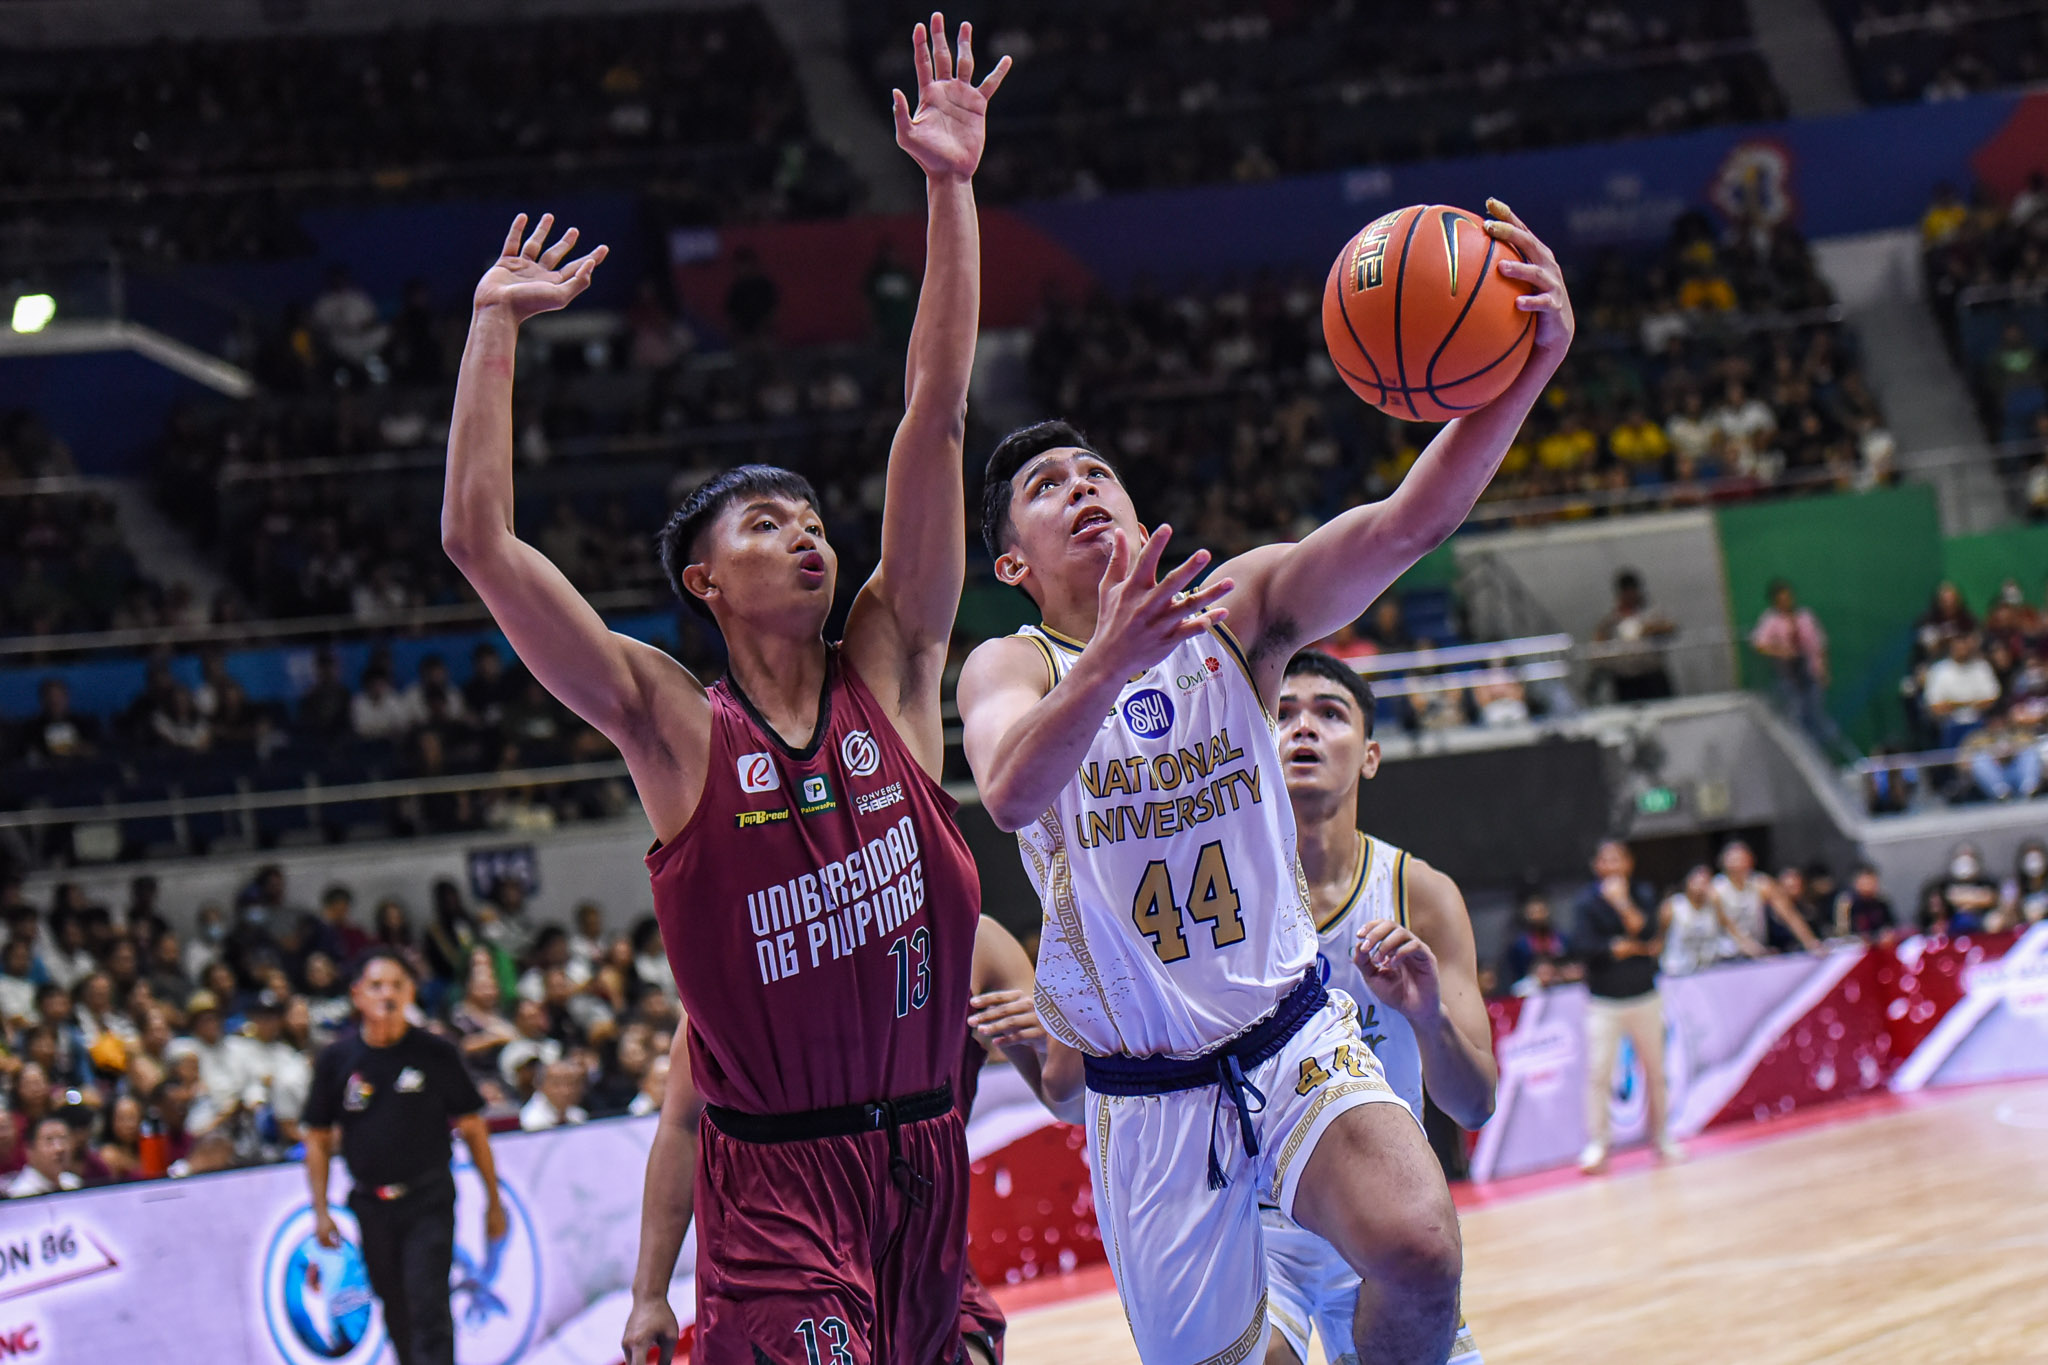 Reinhard Jumamoy competing for the Bulldogs against the UP Fighting Maroons